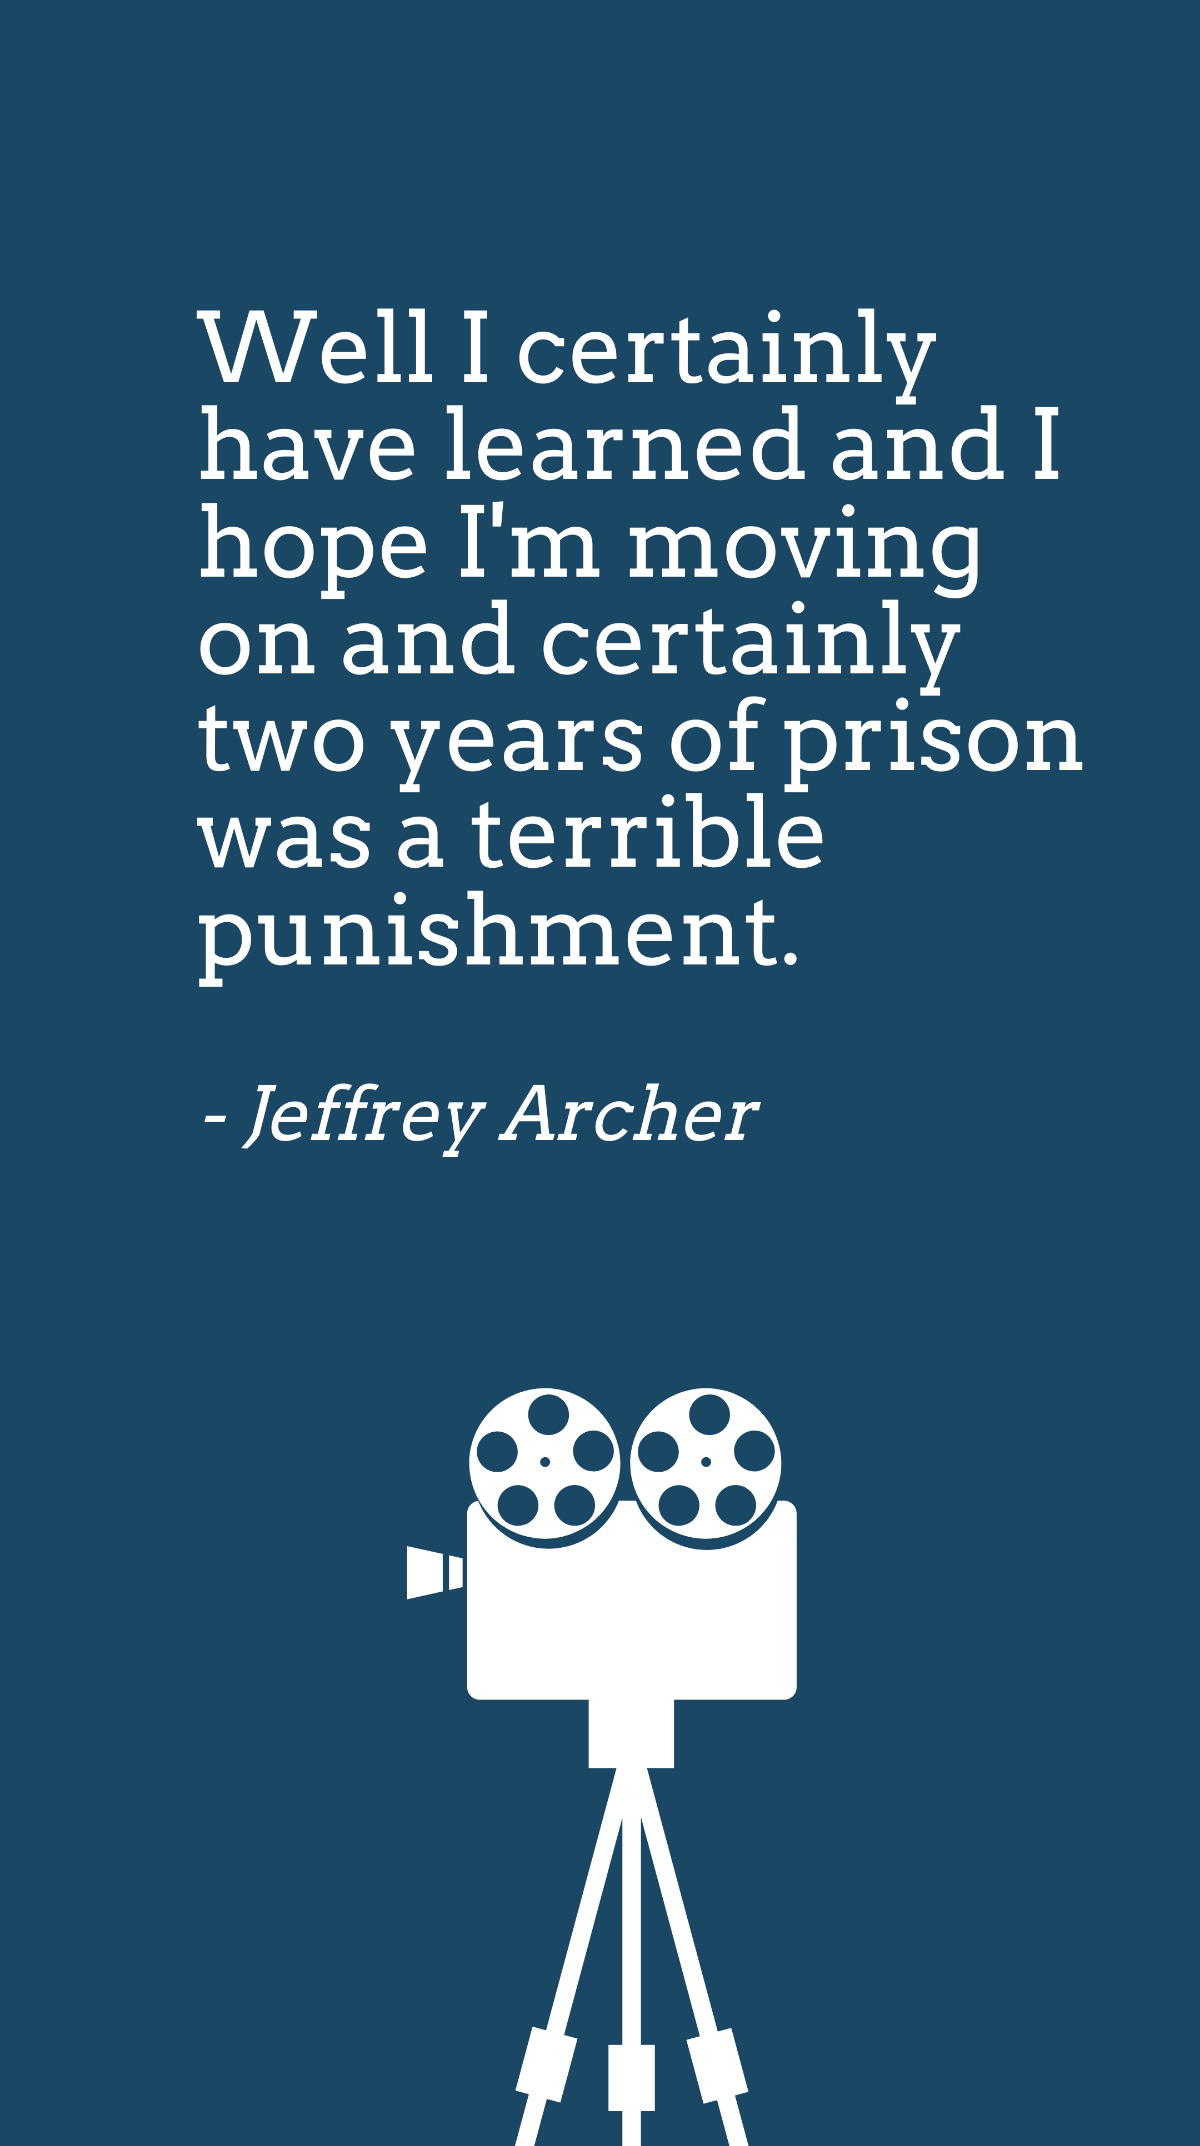 Jeffrey Archer - Well I certainly have learned and I hope I'm moving on and certainly two years of prison was a terrible punishment. Template